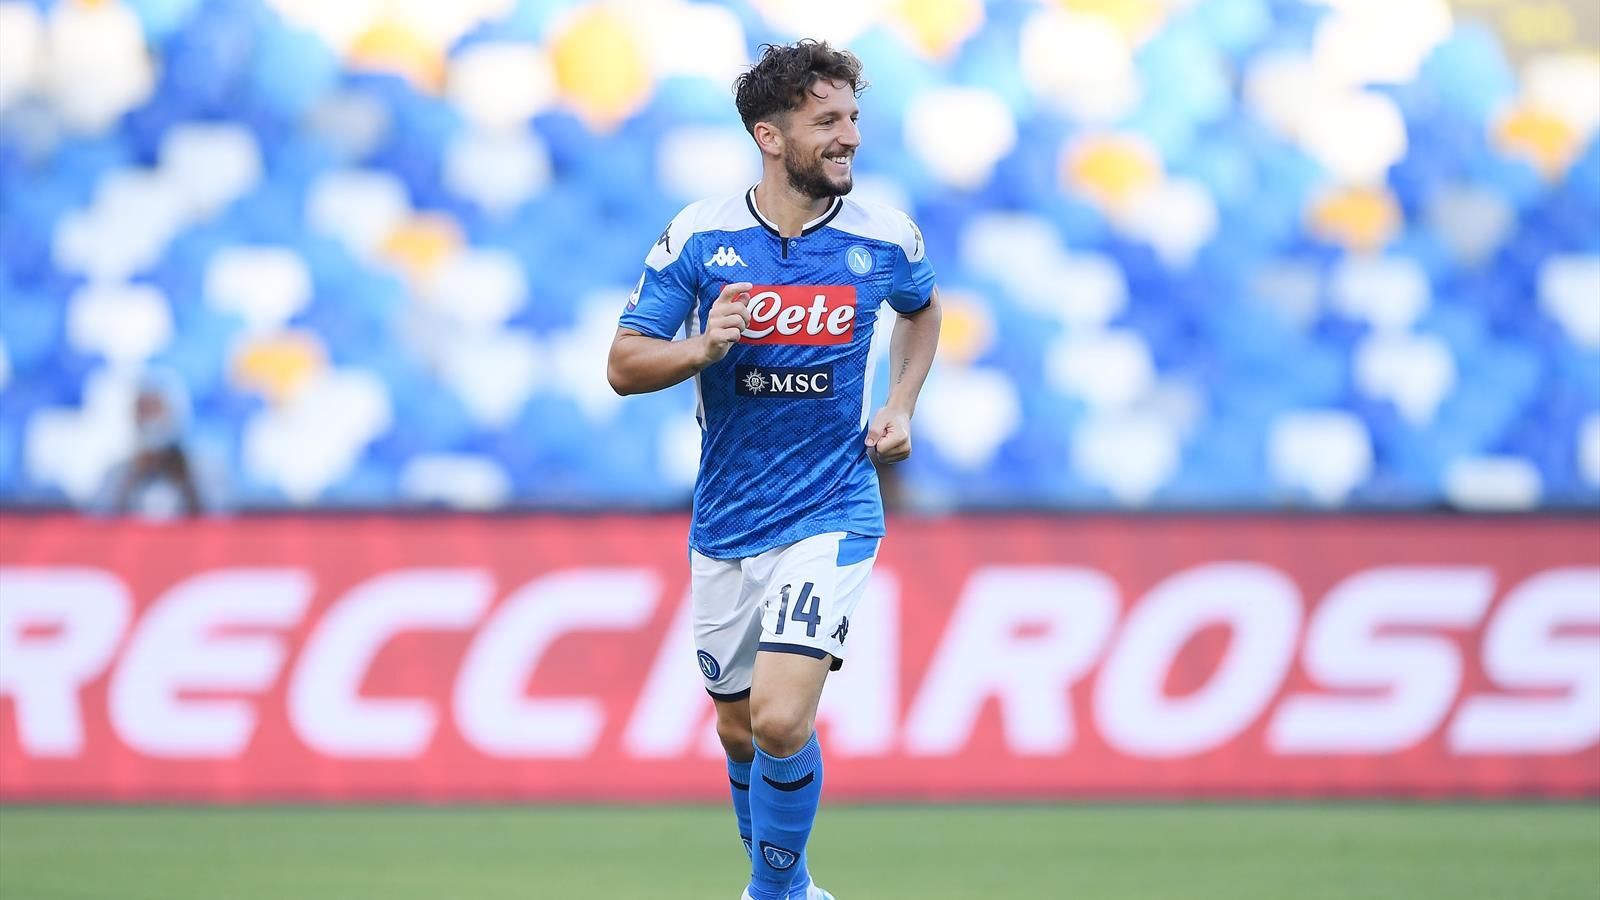 Napoli Defeats SPAL with Three Goals to Their One